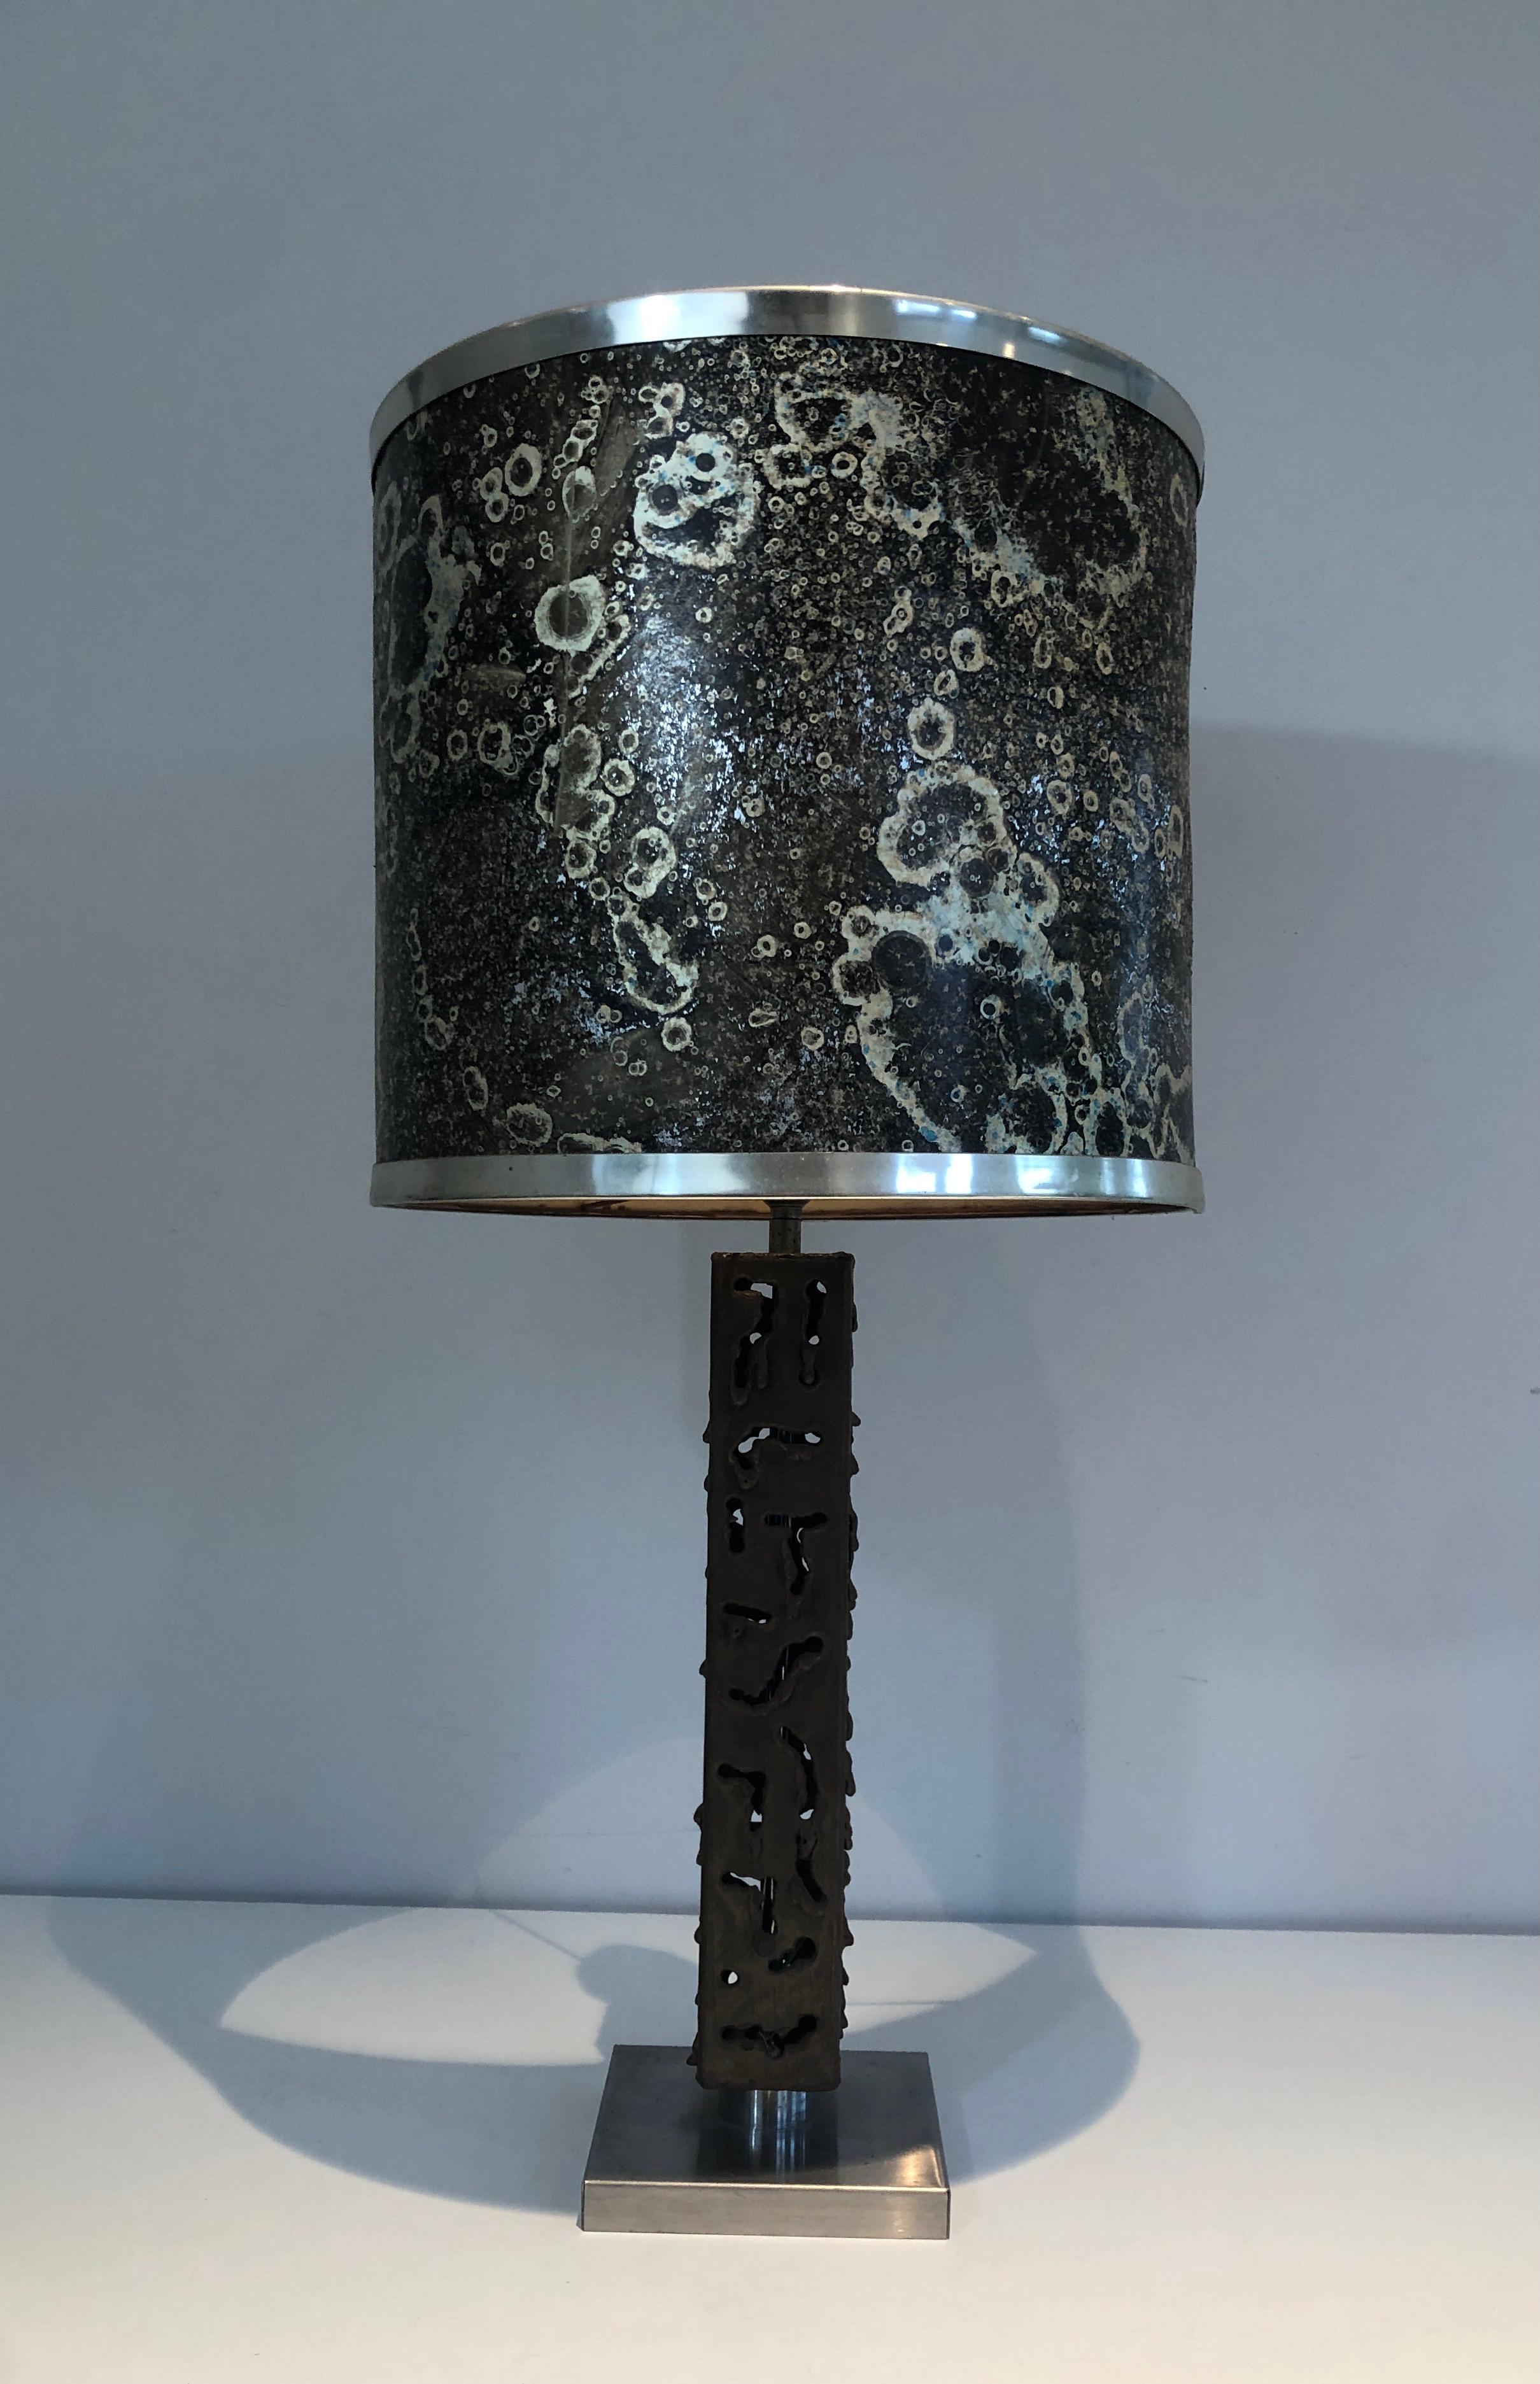 Worked Steel Design Table Lamp, French Work, circa 1970 For Sale 6